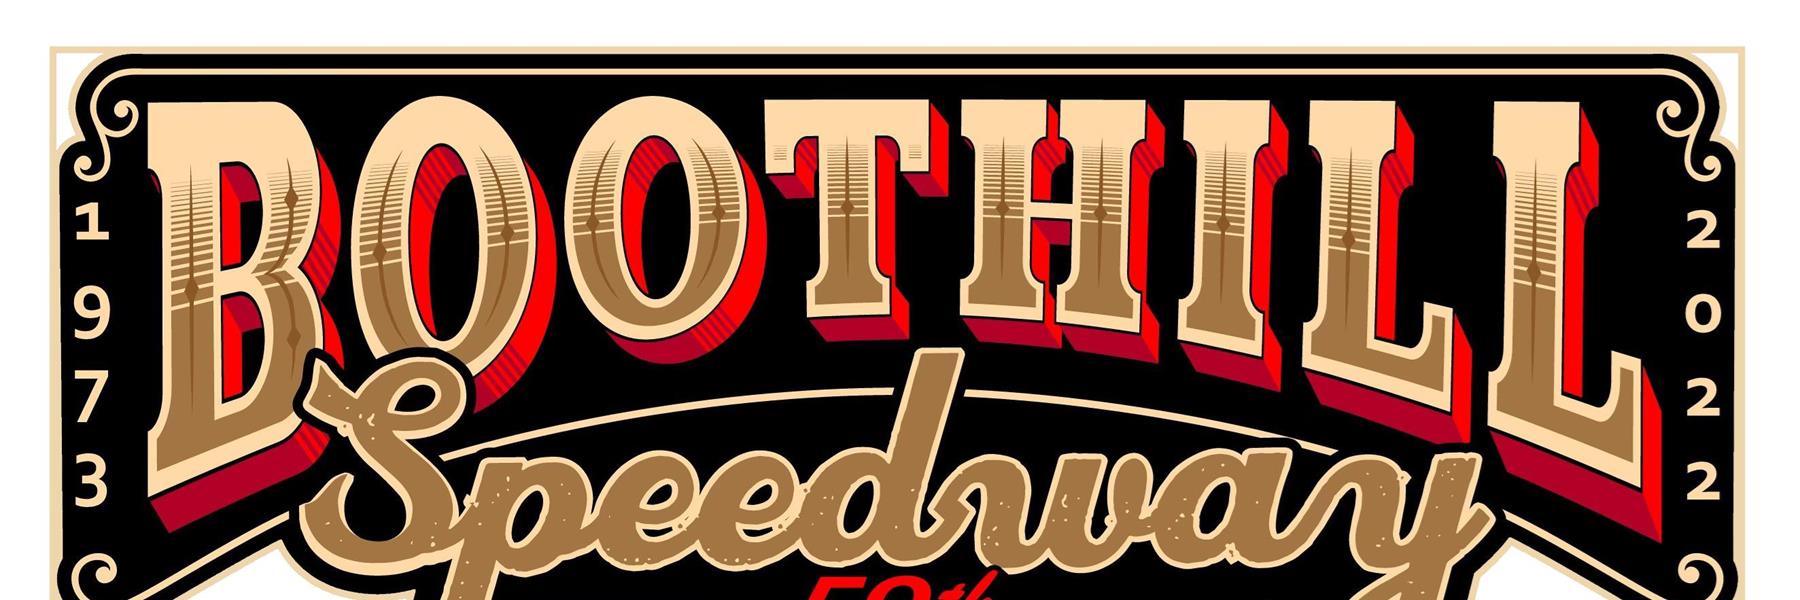 3/10/2023 - Boothill Speedway